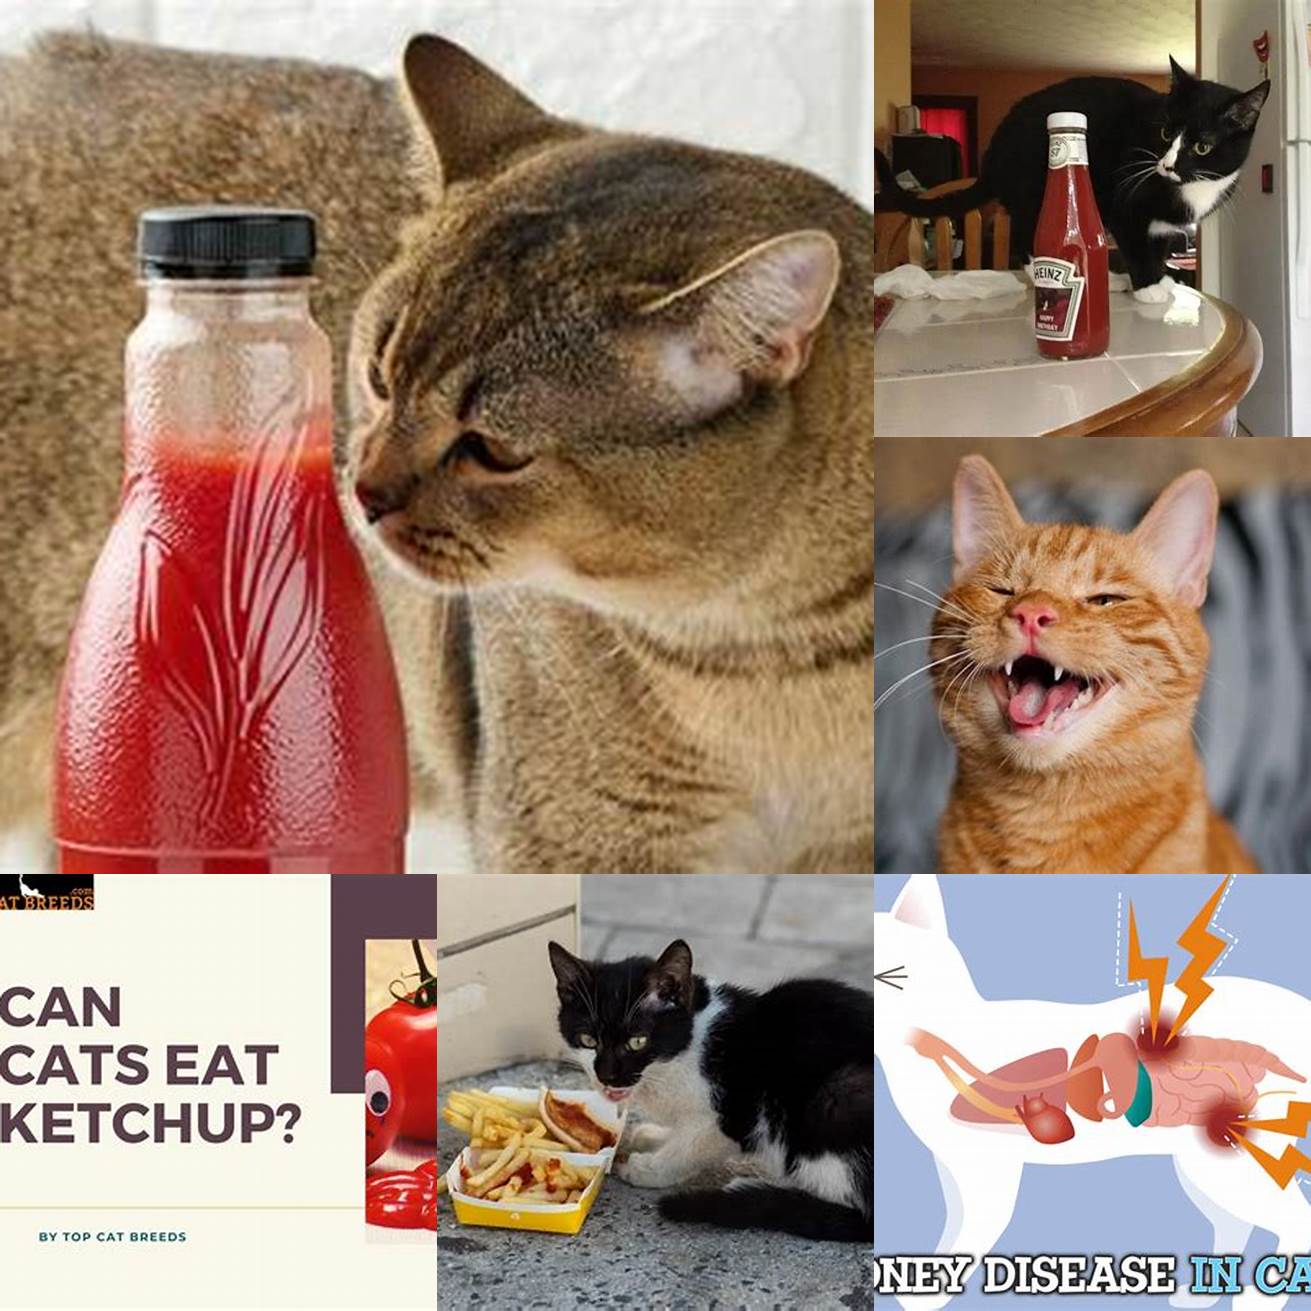 Organ Damage Feeding ketchup to cats in large quantities can lead to organ damage particularly to the kidneys